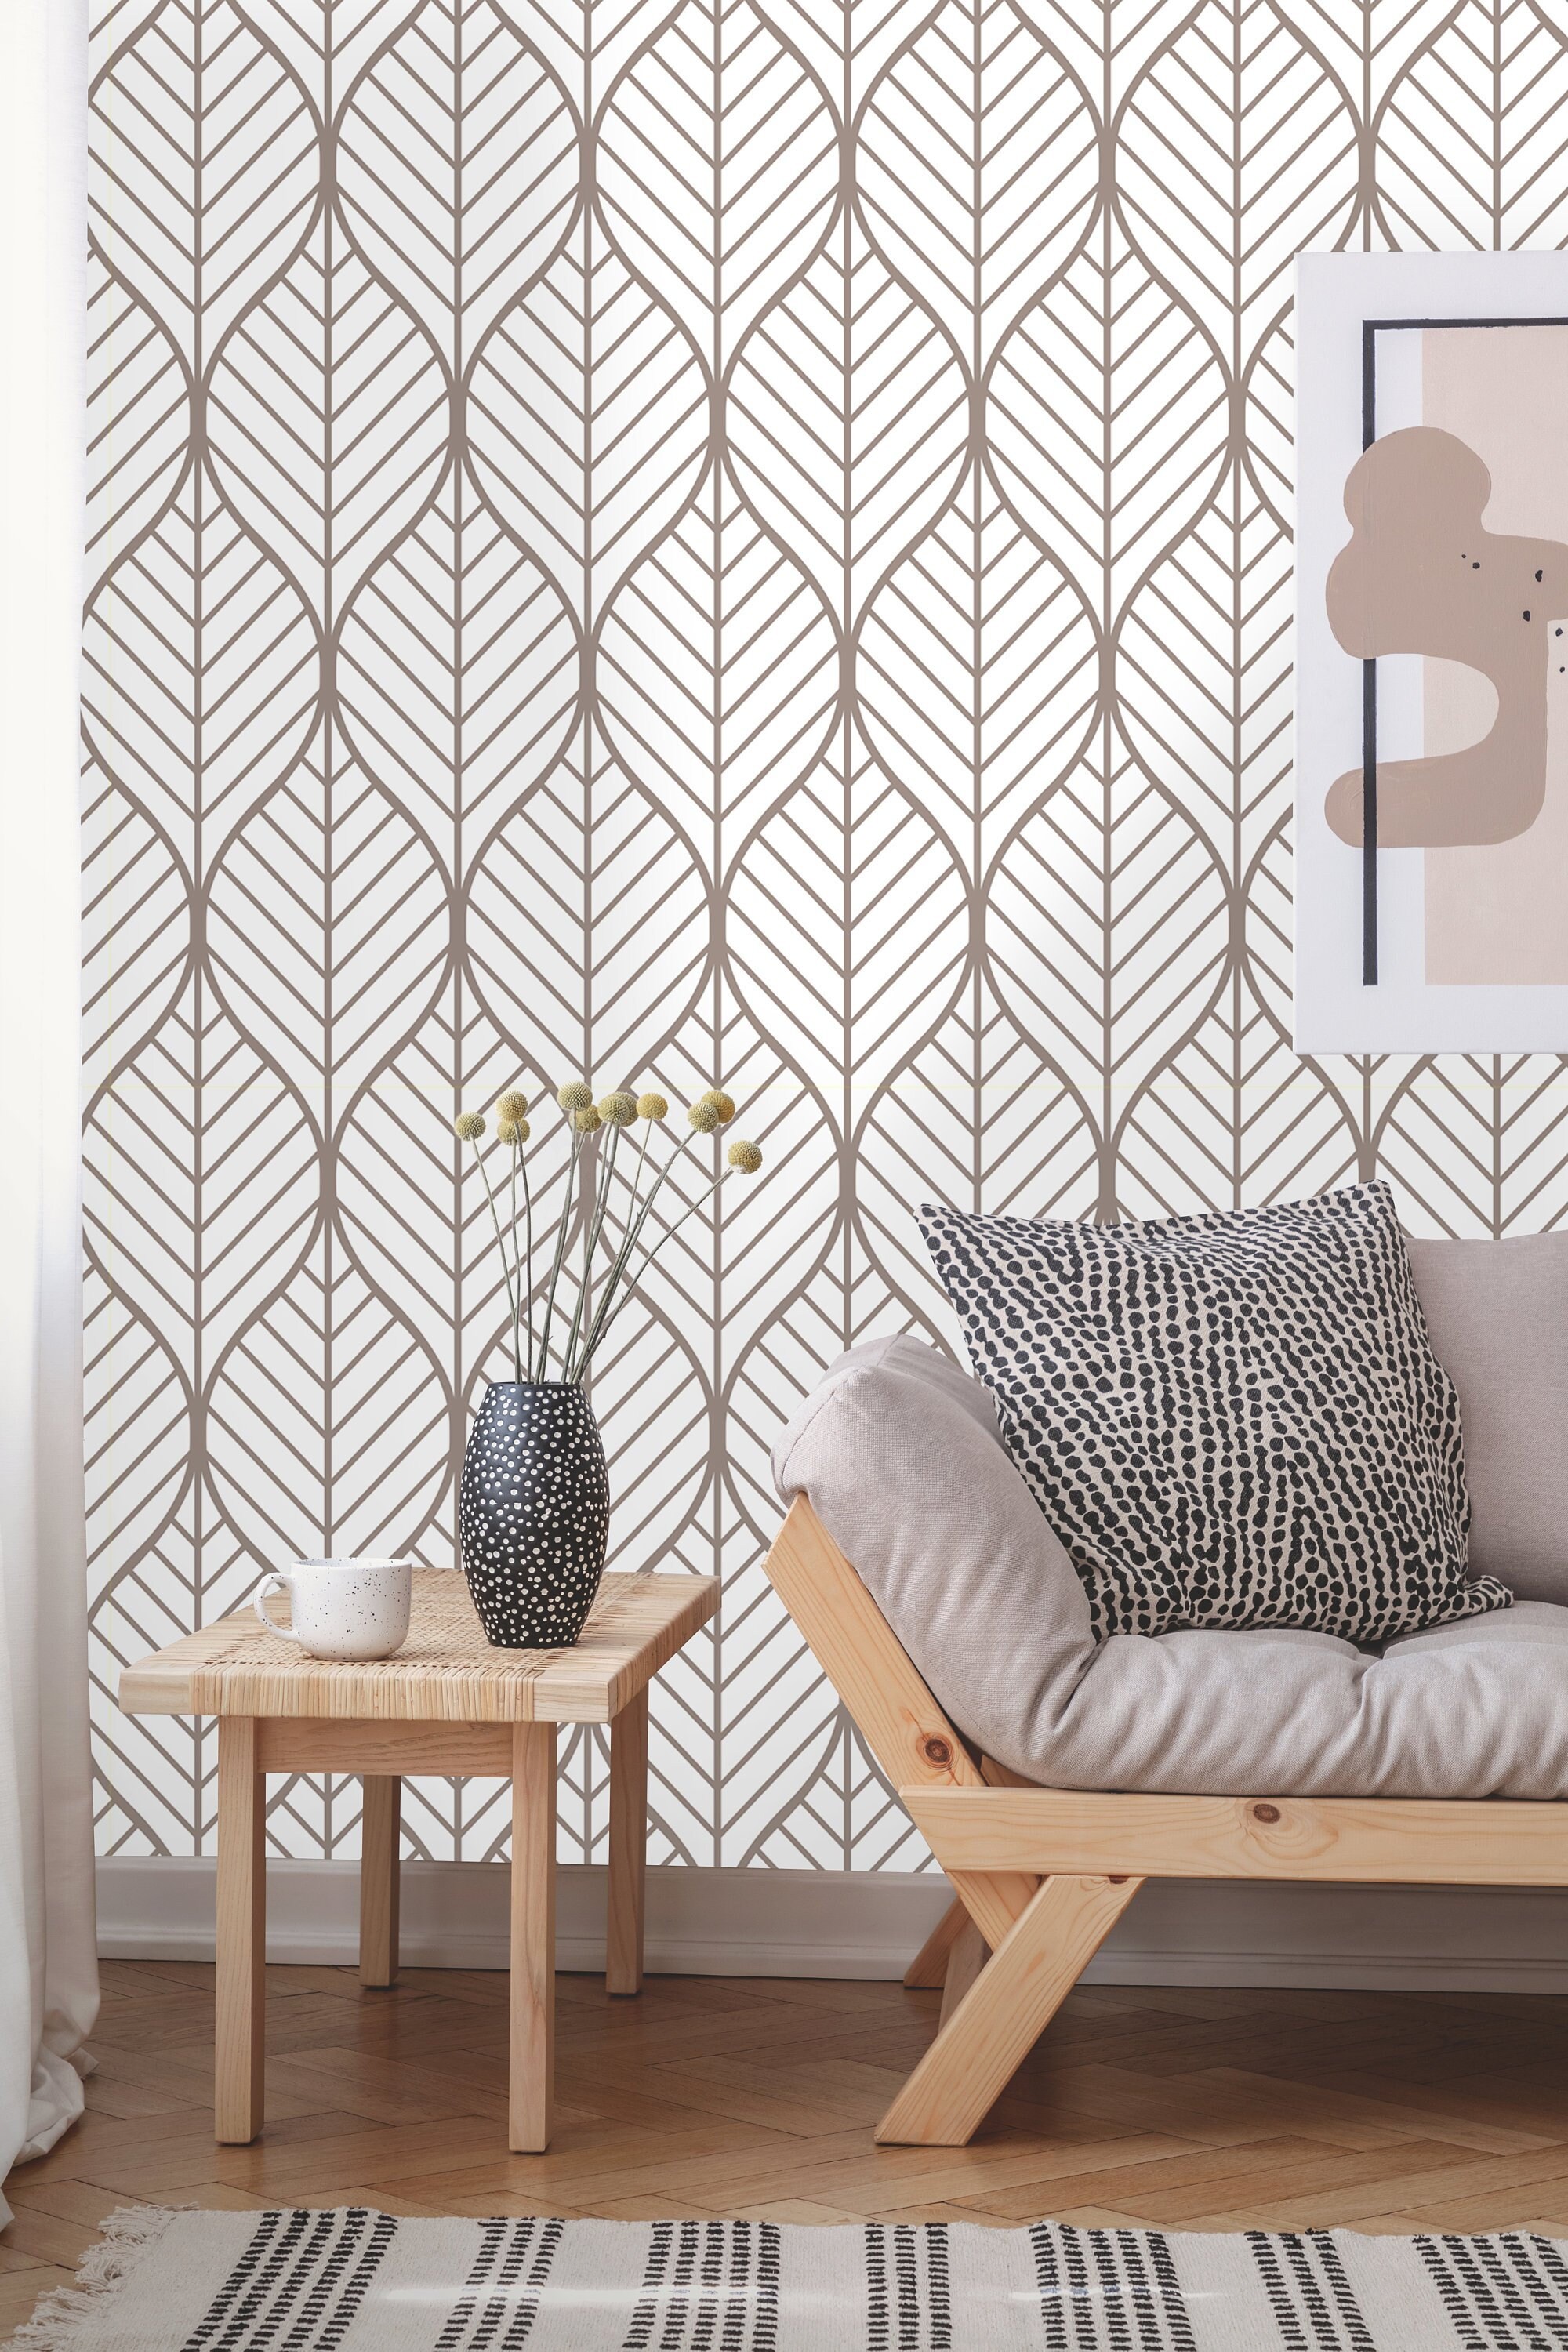 Buy Online  Golden Geometric Pattern Wallpaper Geometric Art Deco Gray  Gold Wallpaper Traditional Non woven or Removable Peel Stick Wallpaper in  US